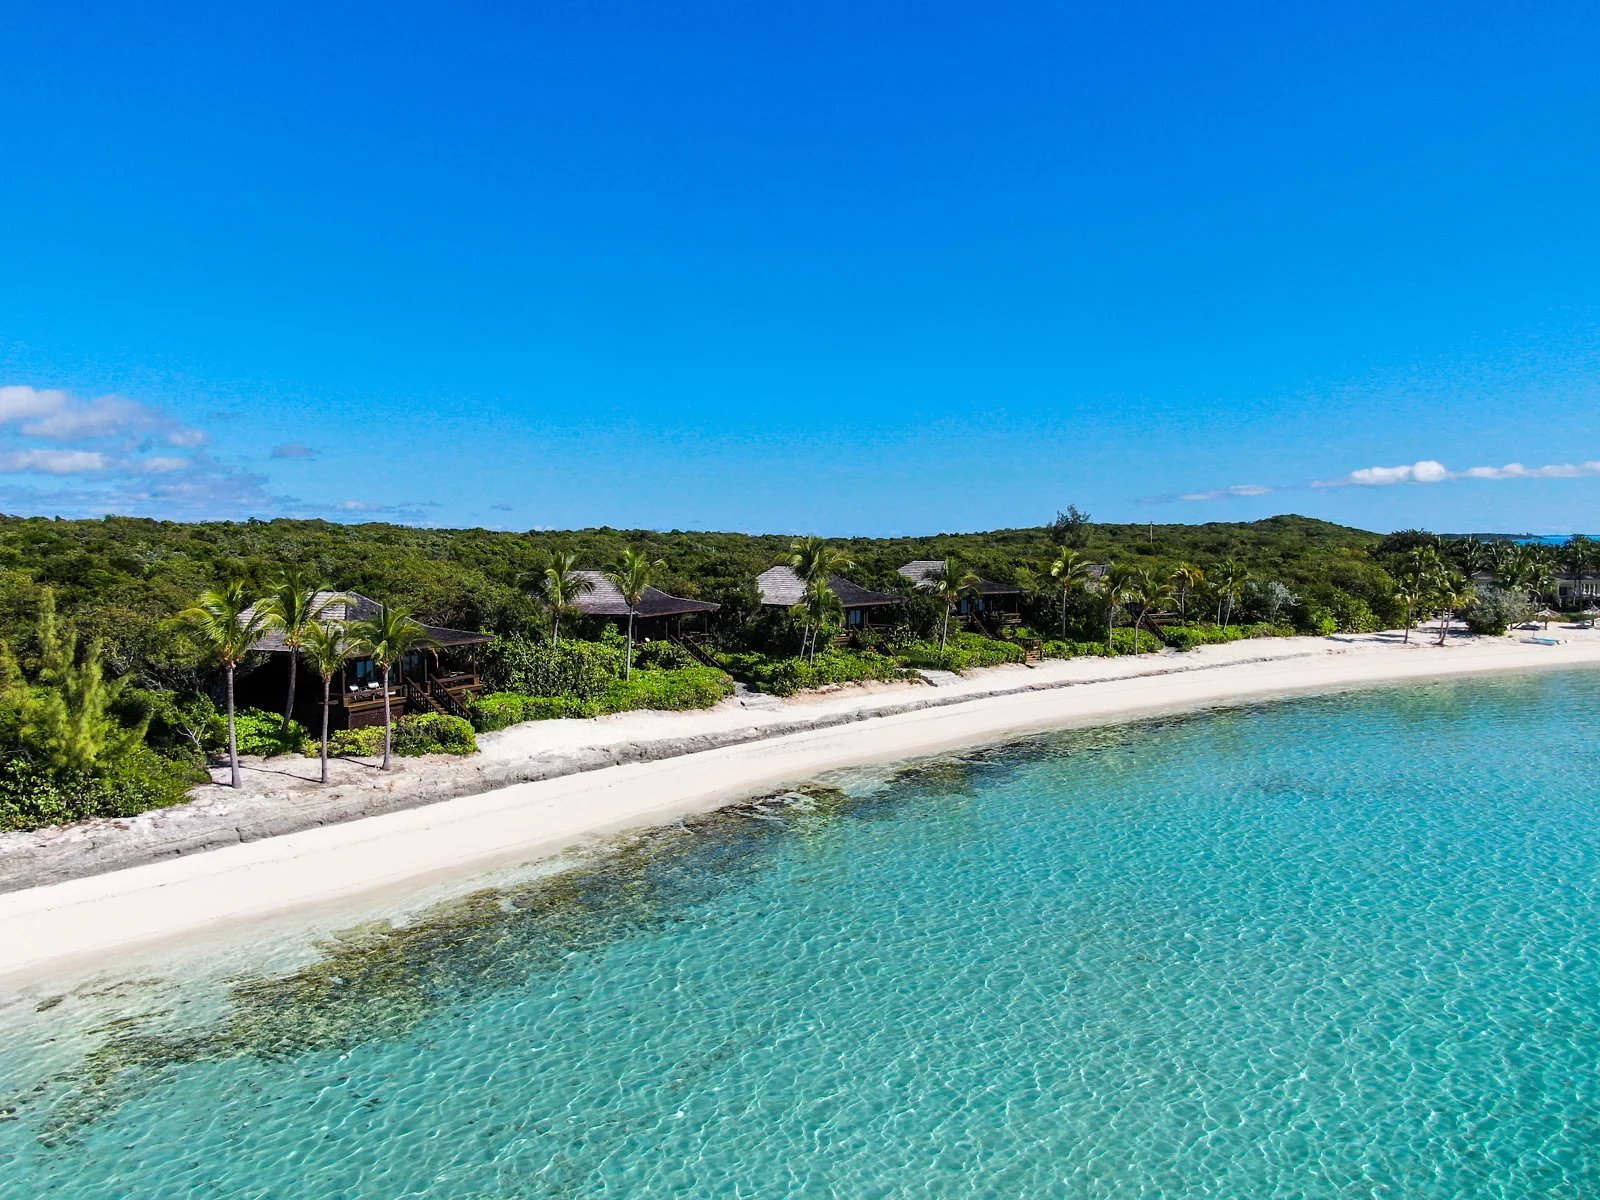 royal island, the perfect private island opportunity - mls 51444 image29